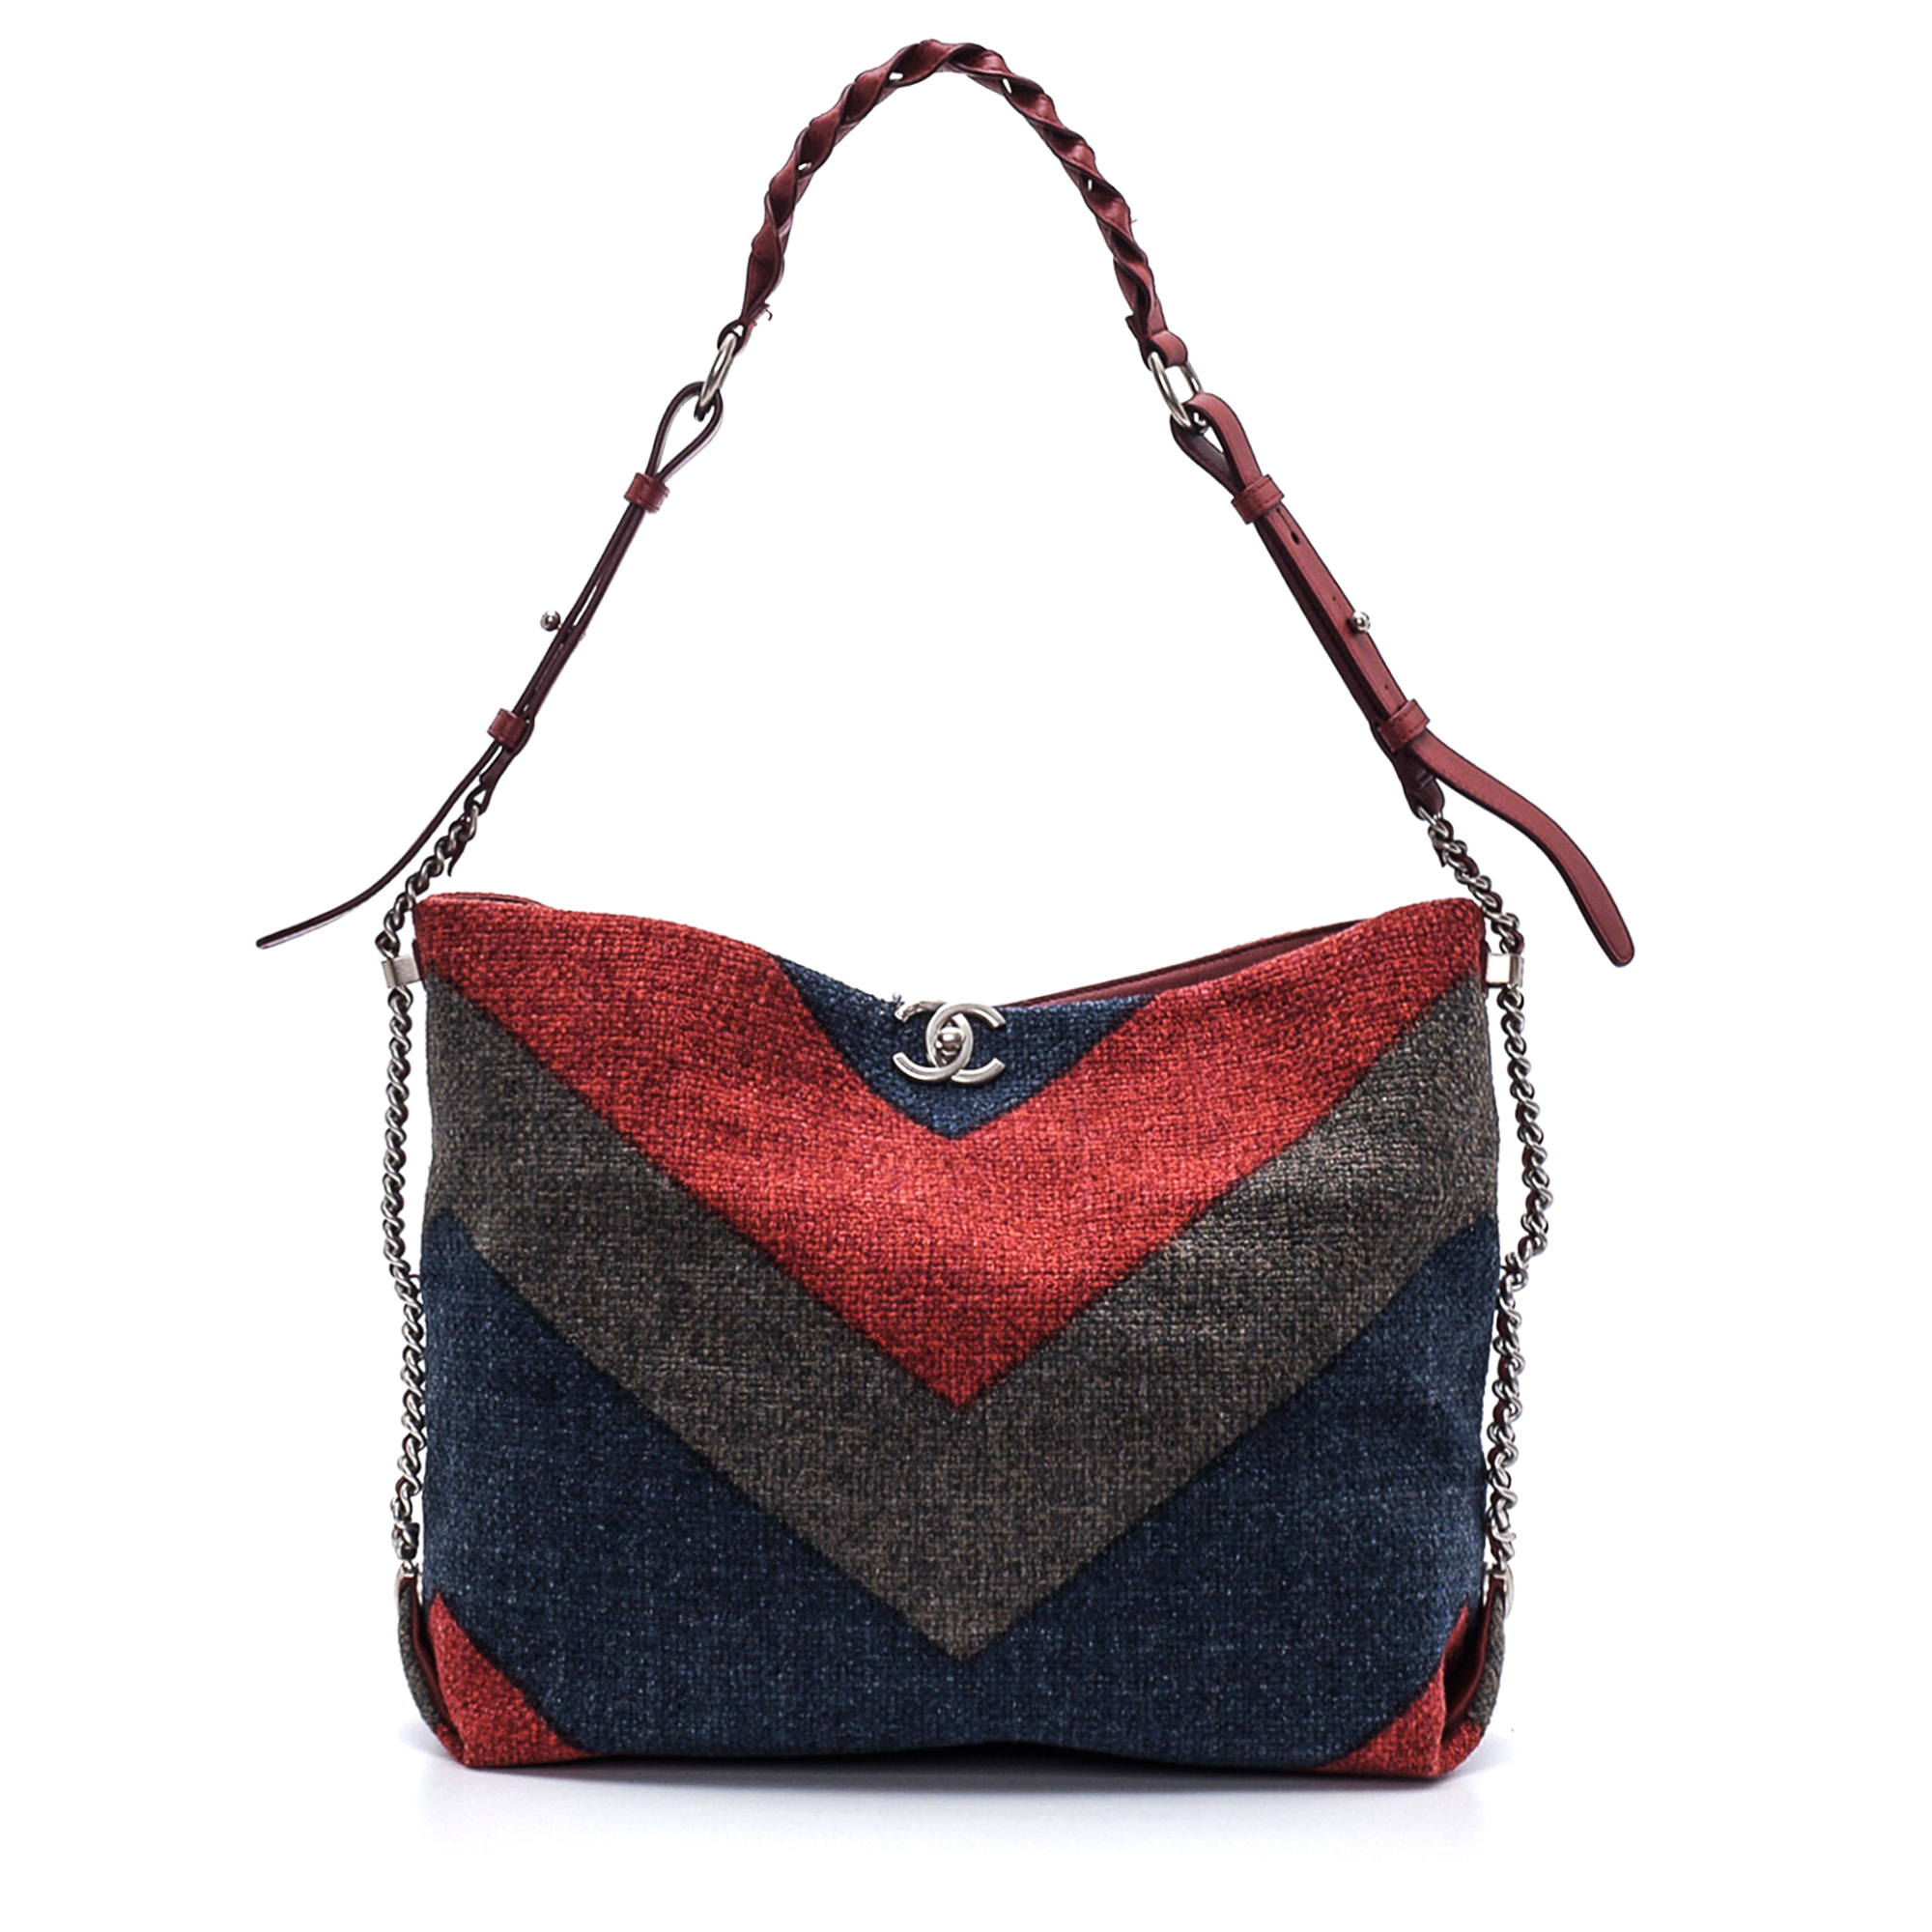 Chanel - Tricolor Knitted Shopping Bag 